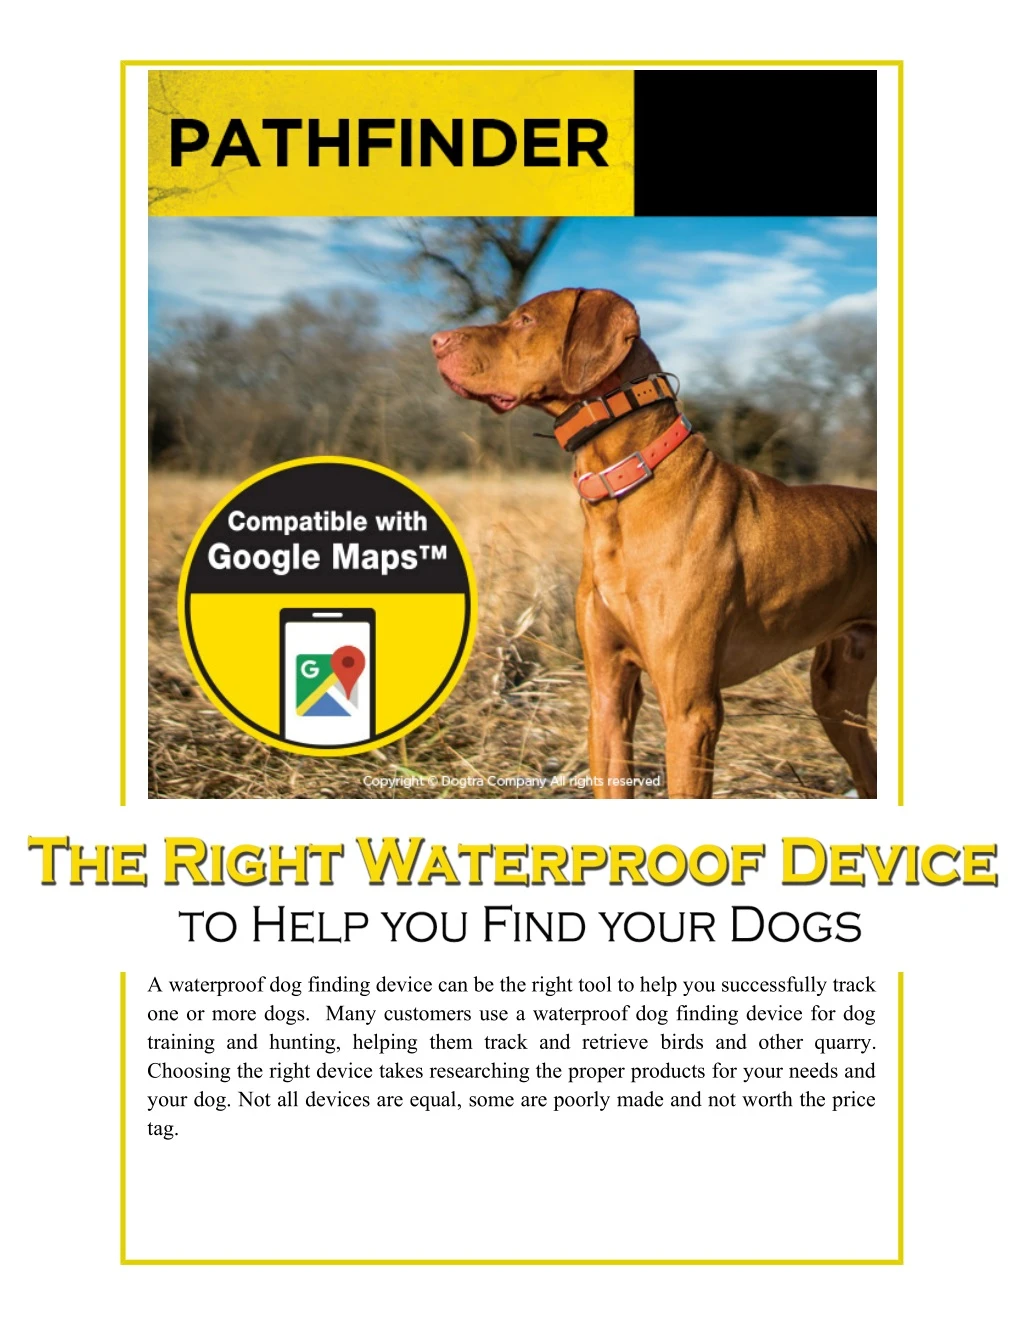 a waterproof dog finding device can be the right